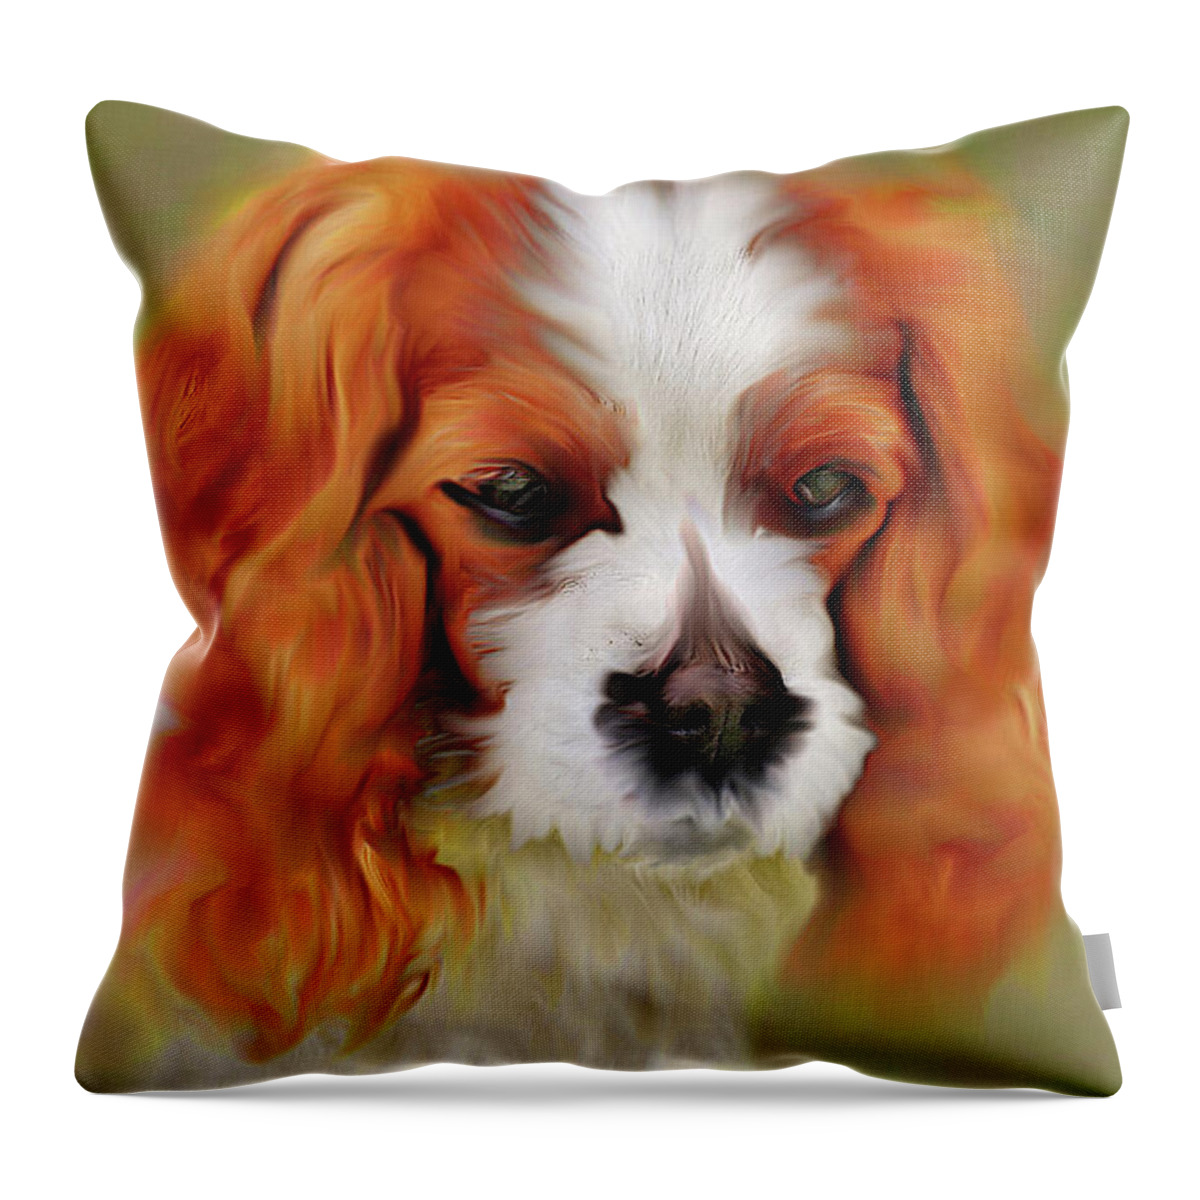 Red Throw Pillow featuring the mixed media Cavalier King Charles Spaniel, Red Dog Portrait by Shelli Fitzpatrick